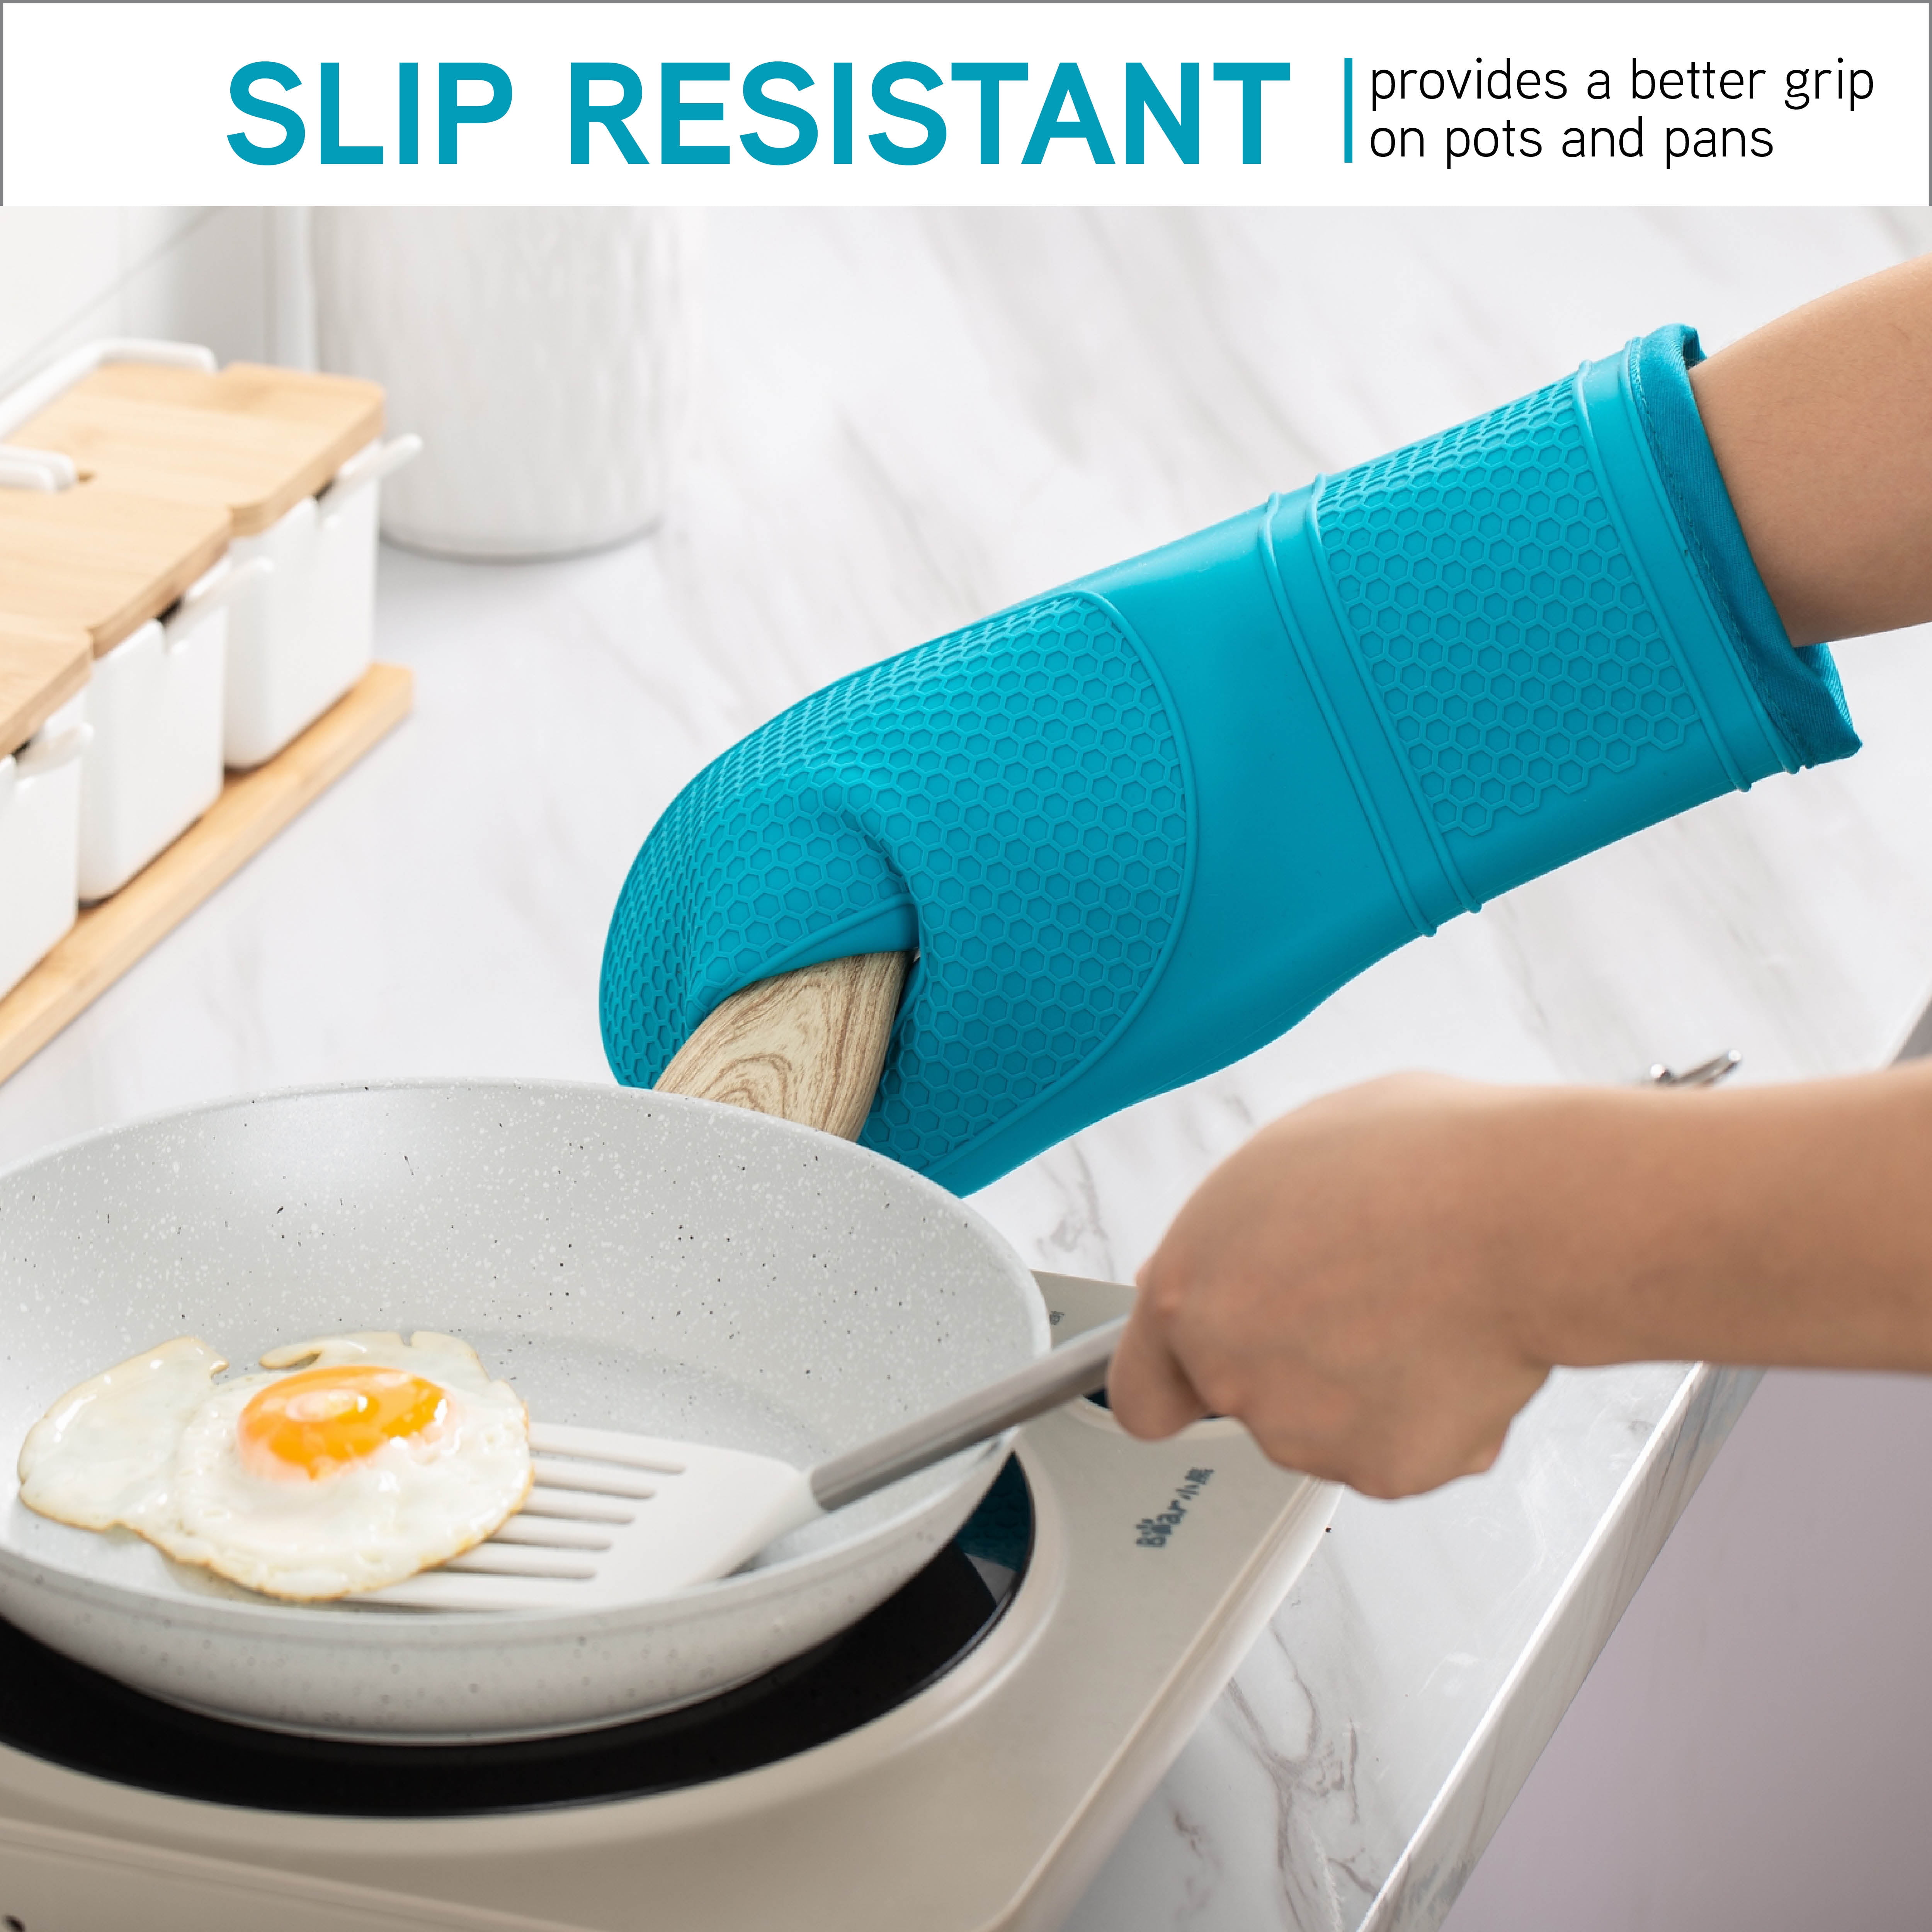 UpNUpCo Artistic Colorful Oven Mitts - Unique & Cute - Soft & Safety -  Quilted & Padded - Heat Resistant - Beautiful Kitchen Gloves - Chef Gloves  